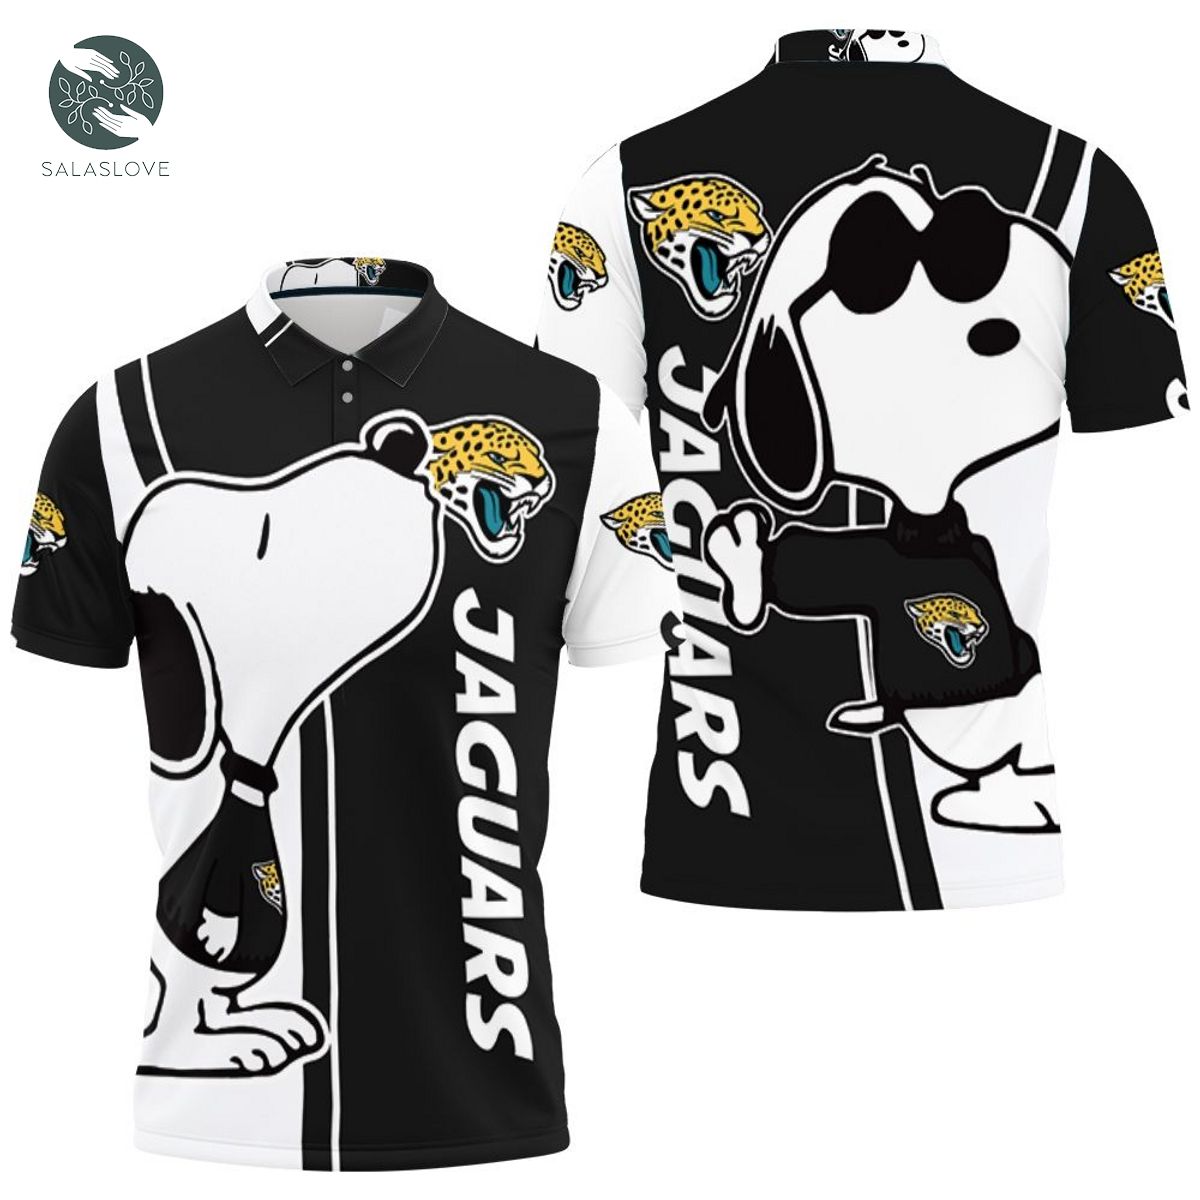 Jacksonville Jaguars Snoopy Lover 3D Printed Polo shirt